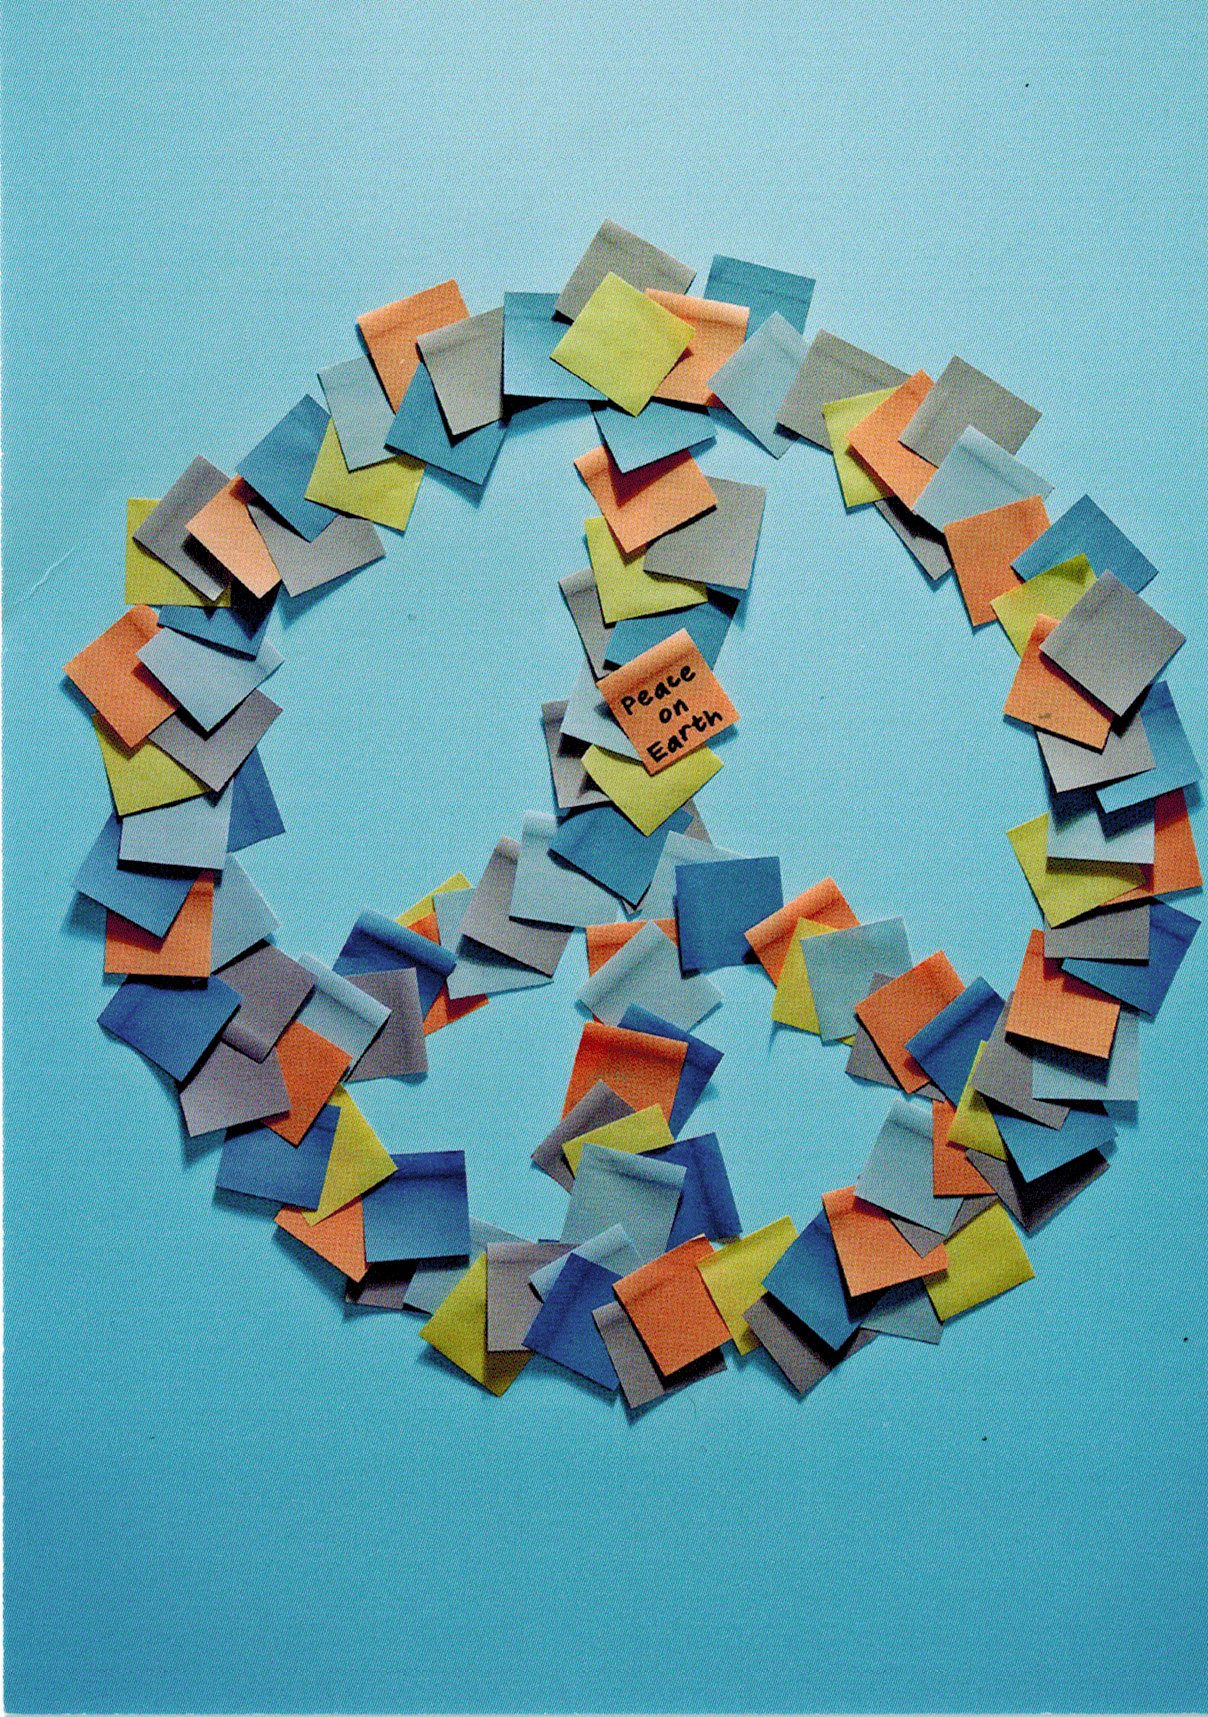 Post-it Peace on Earth photographed by David Arky